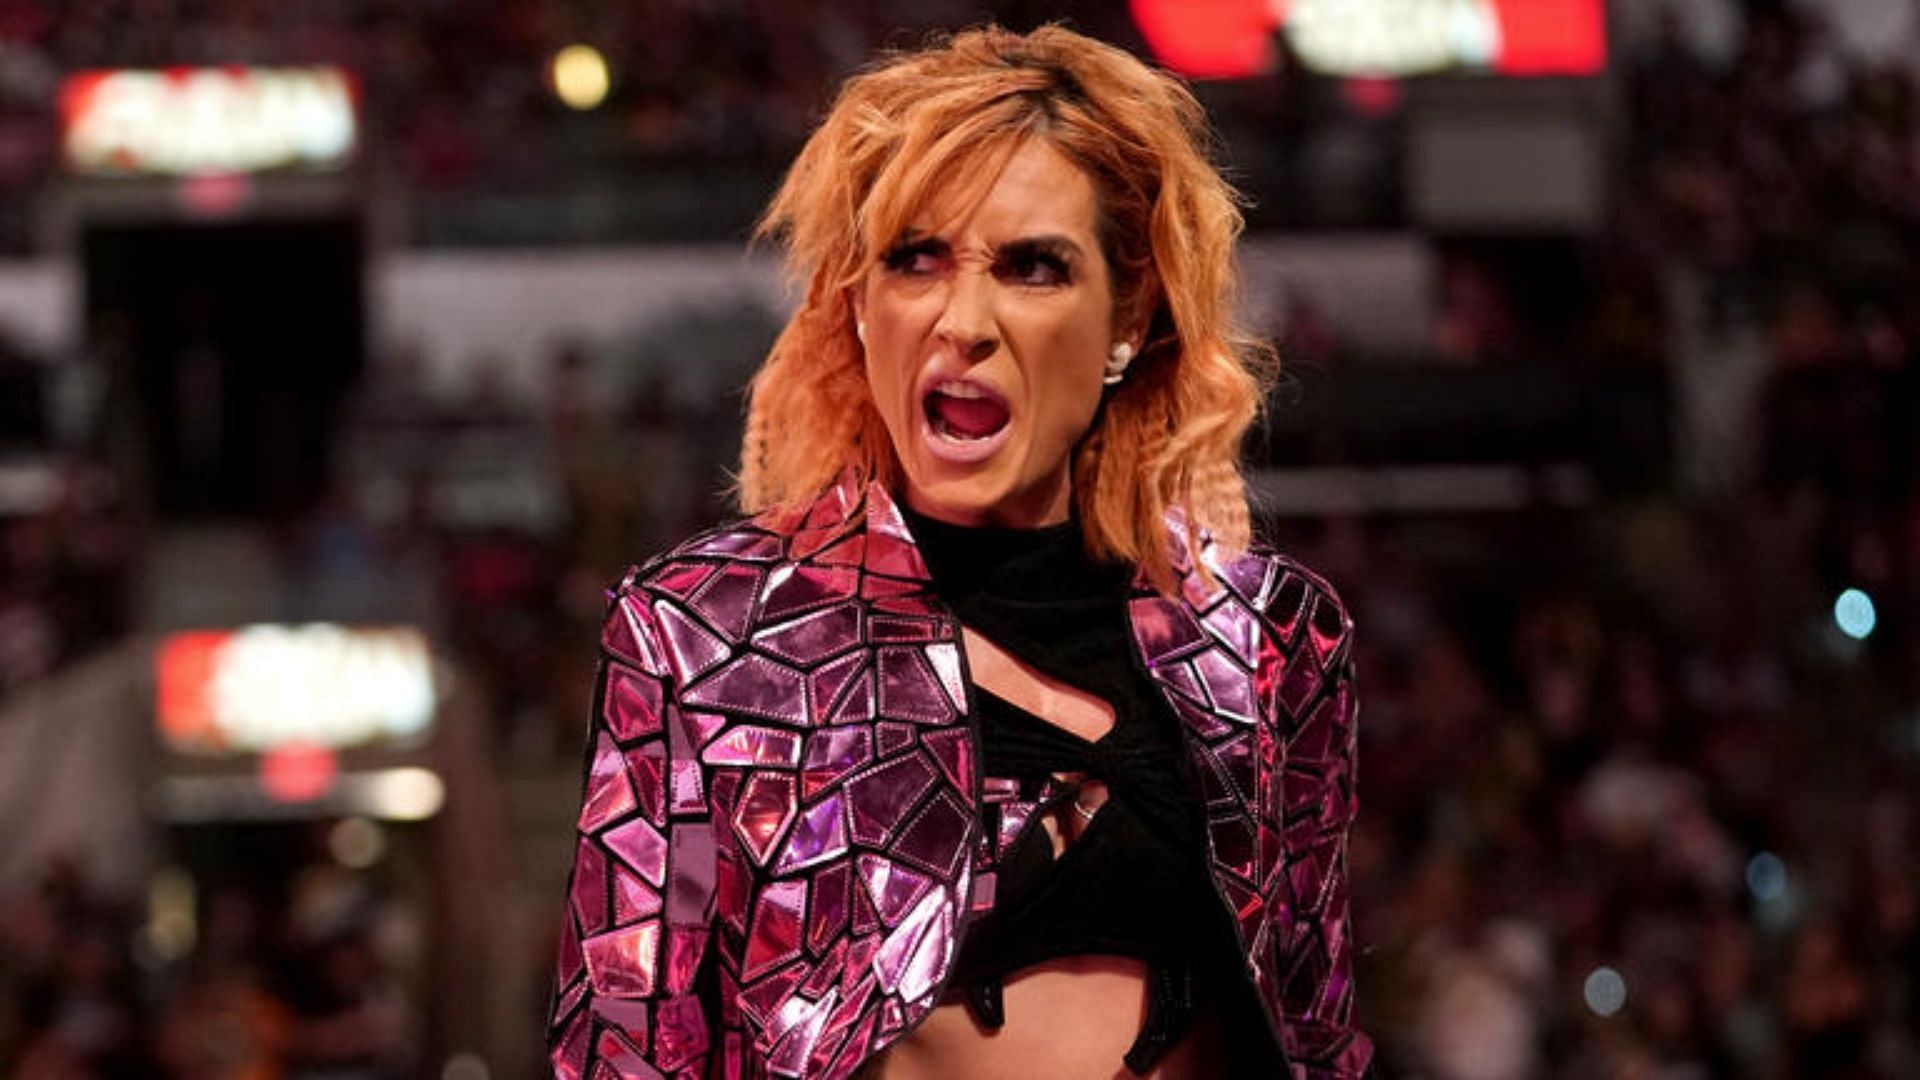 Becky Lynch is one of the biggest stars in WWE.